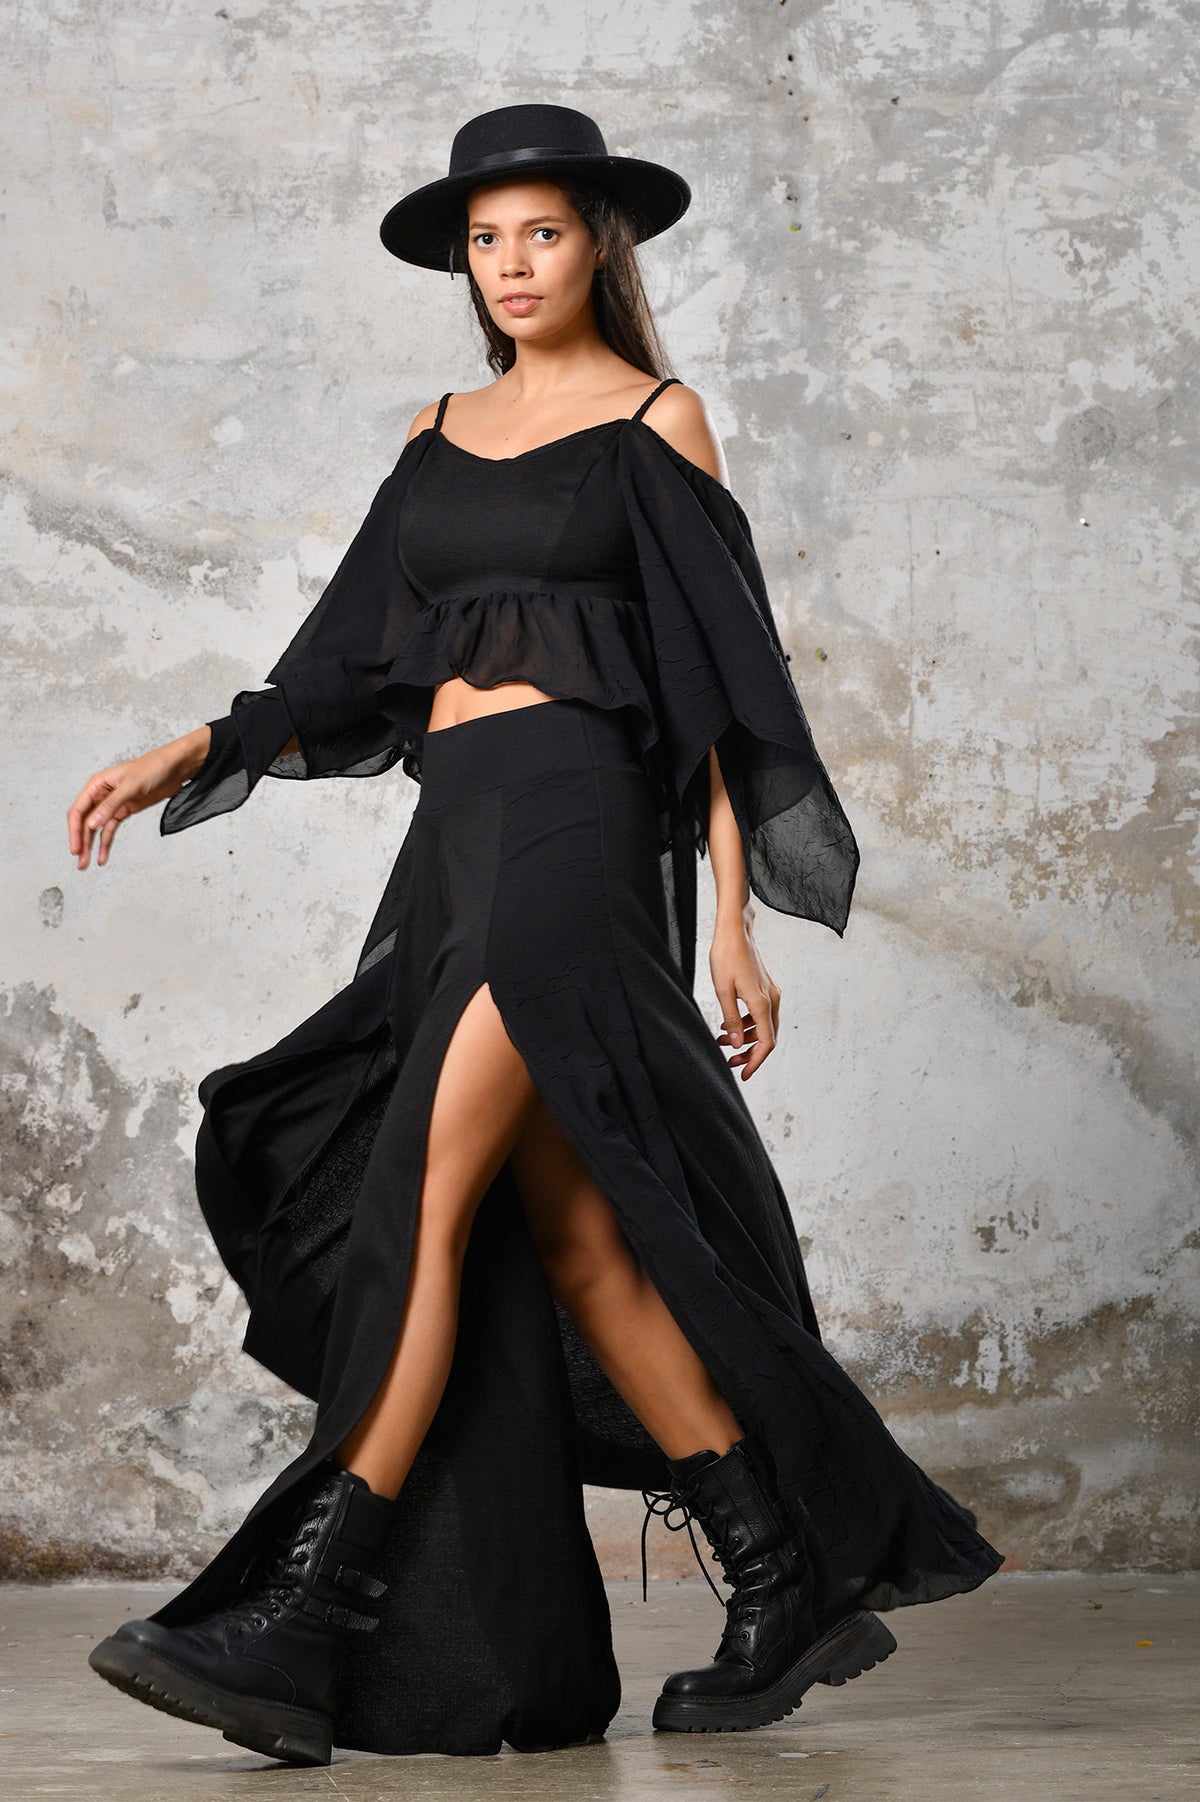 An enchanting Bohemian Venus black blouse, perfect for boho and festival-inspired looks, exuding a goddess-like quality. The flowy fabric and intricate side details create an ethereal, bohemian style perfect for Burning Man and other occasions. This garment is an ethically crafted gem